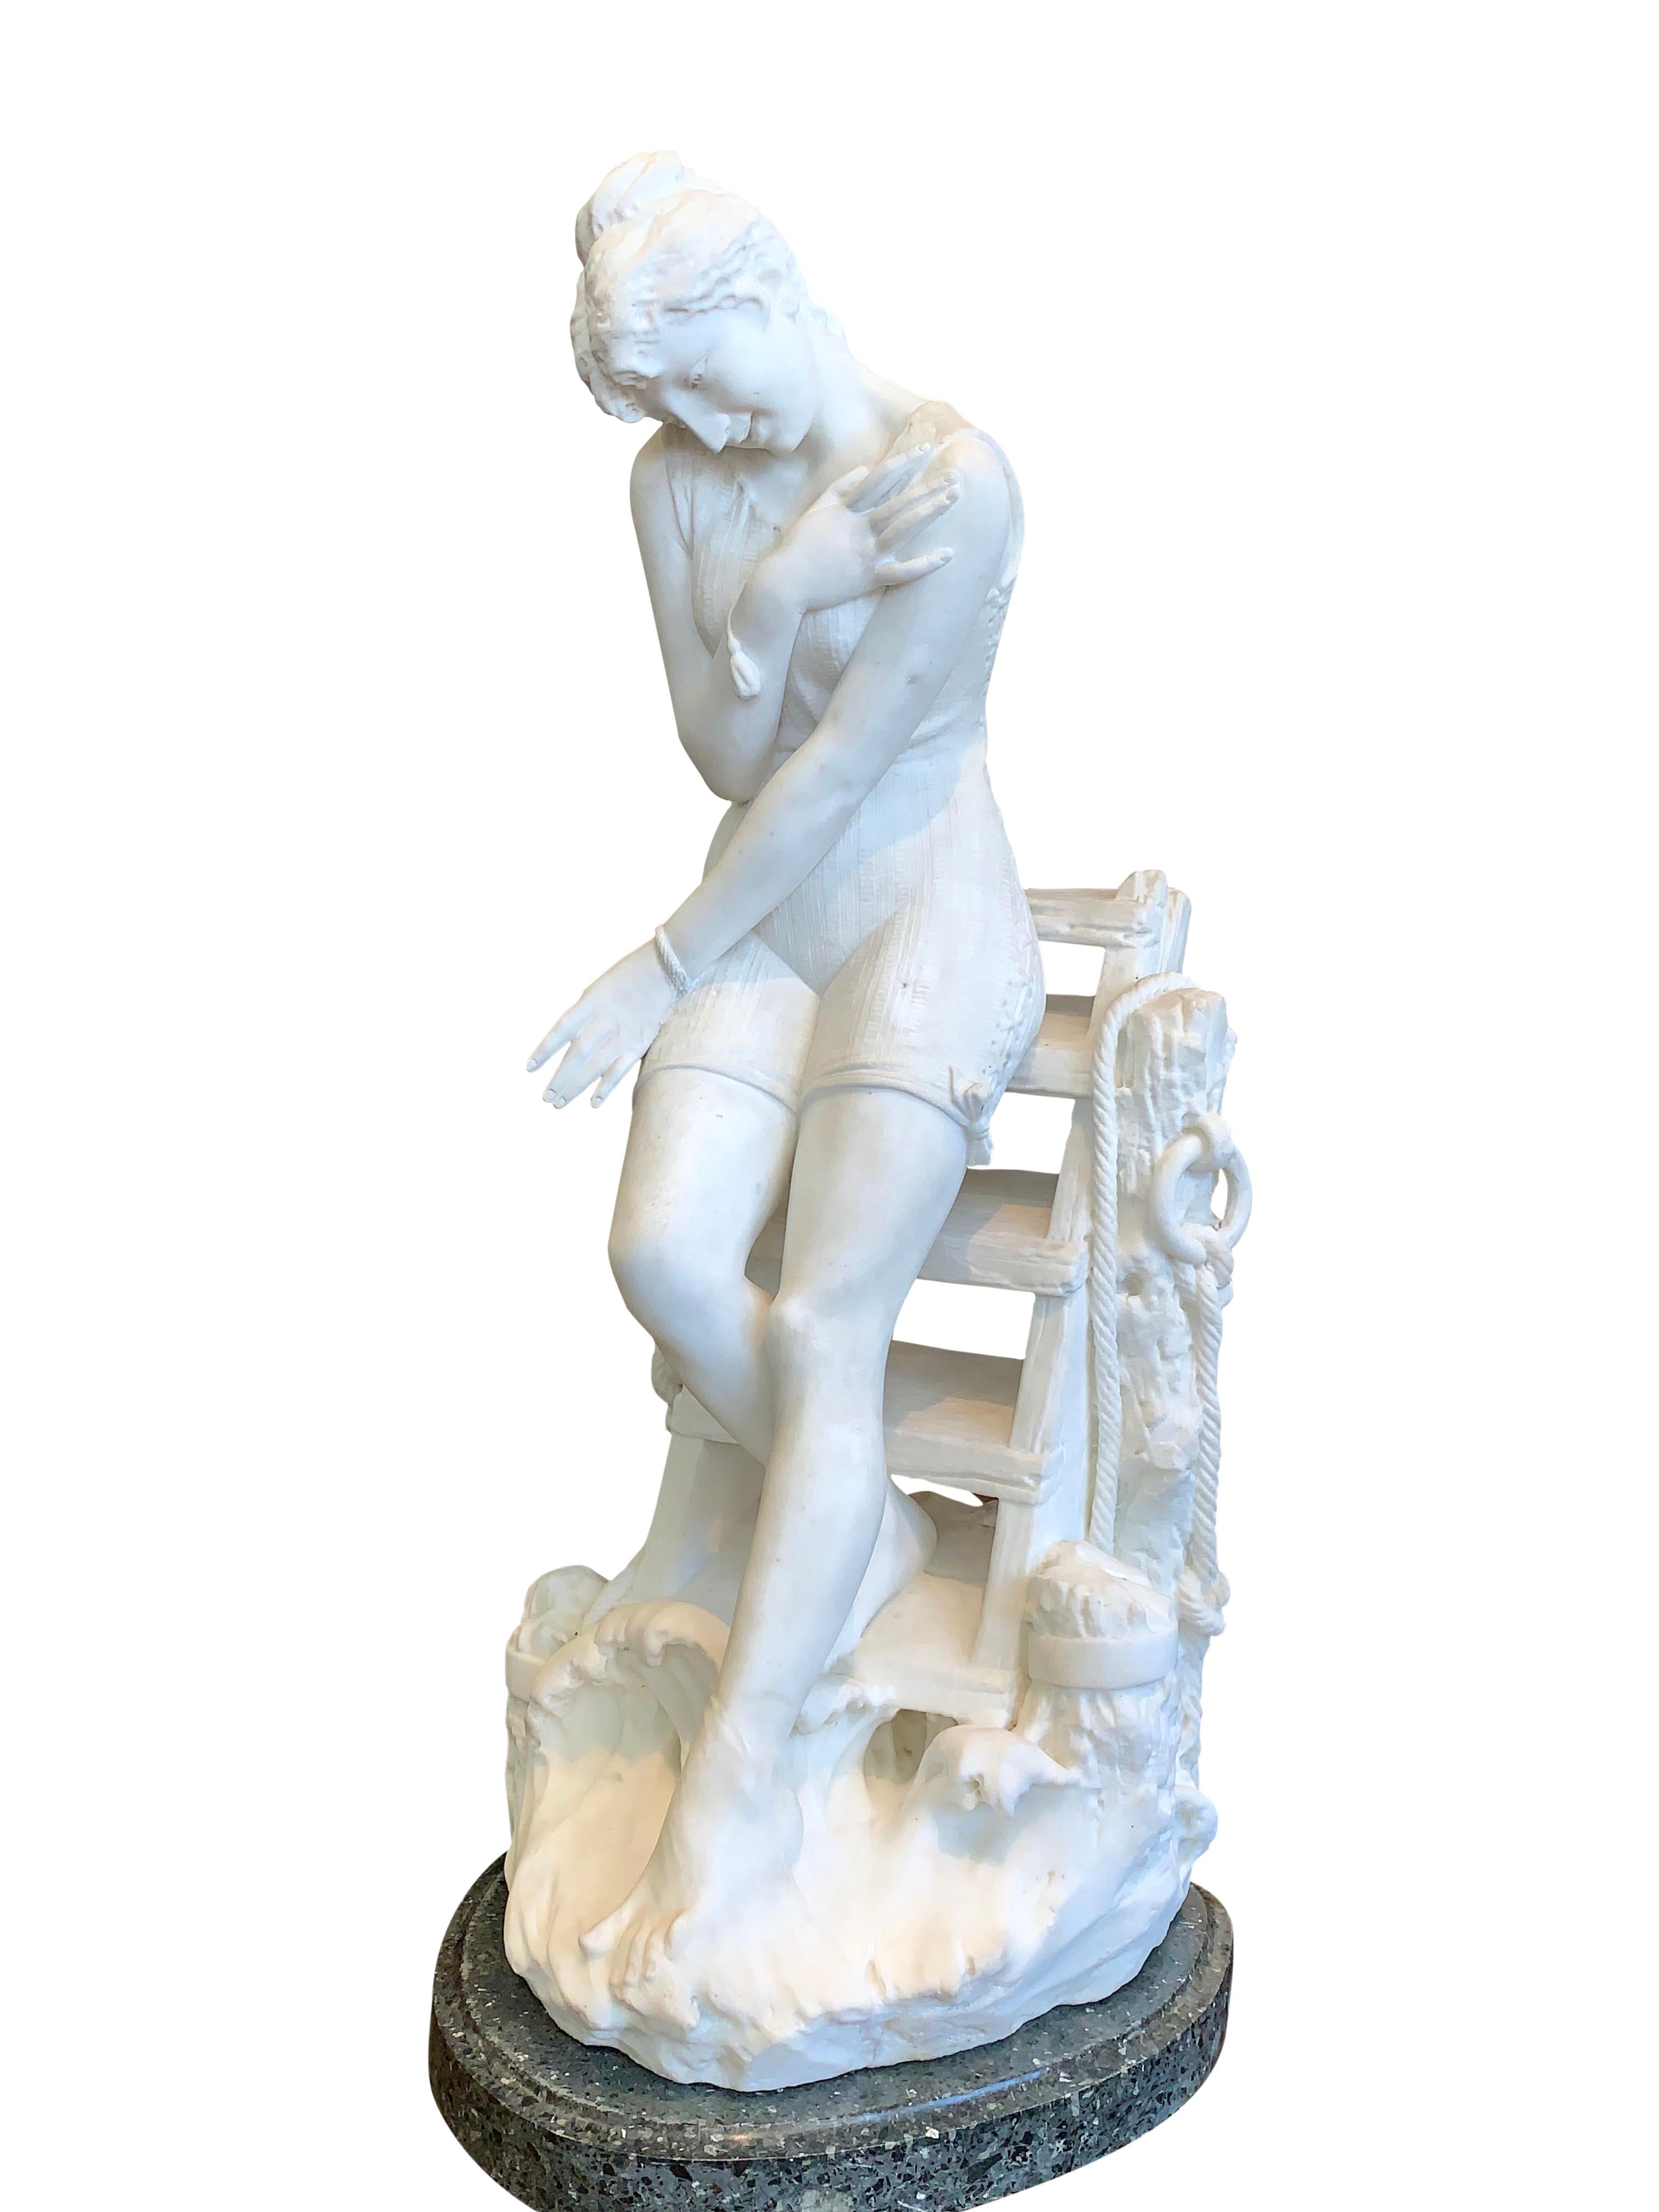 A magnificent large 19th century Italian carved marble figure of a young lady wearing a laced bathing suit, stepping down from an old dock to test the temperature of the water with her toes. Raised on its original green marble pedestal.
By Emilio